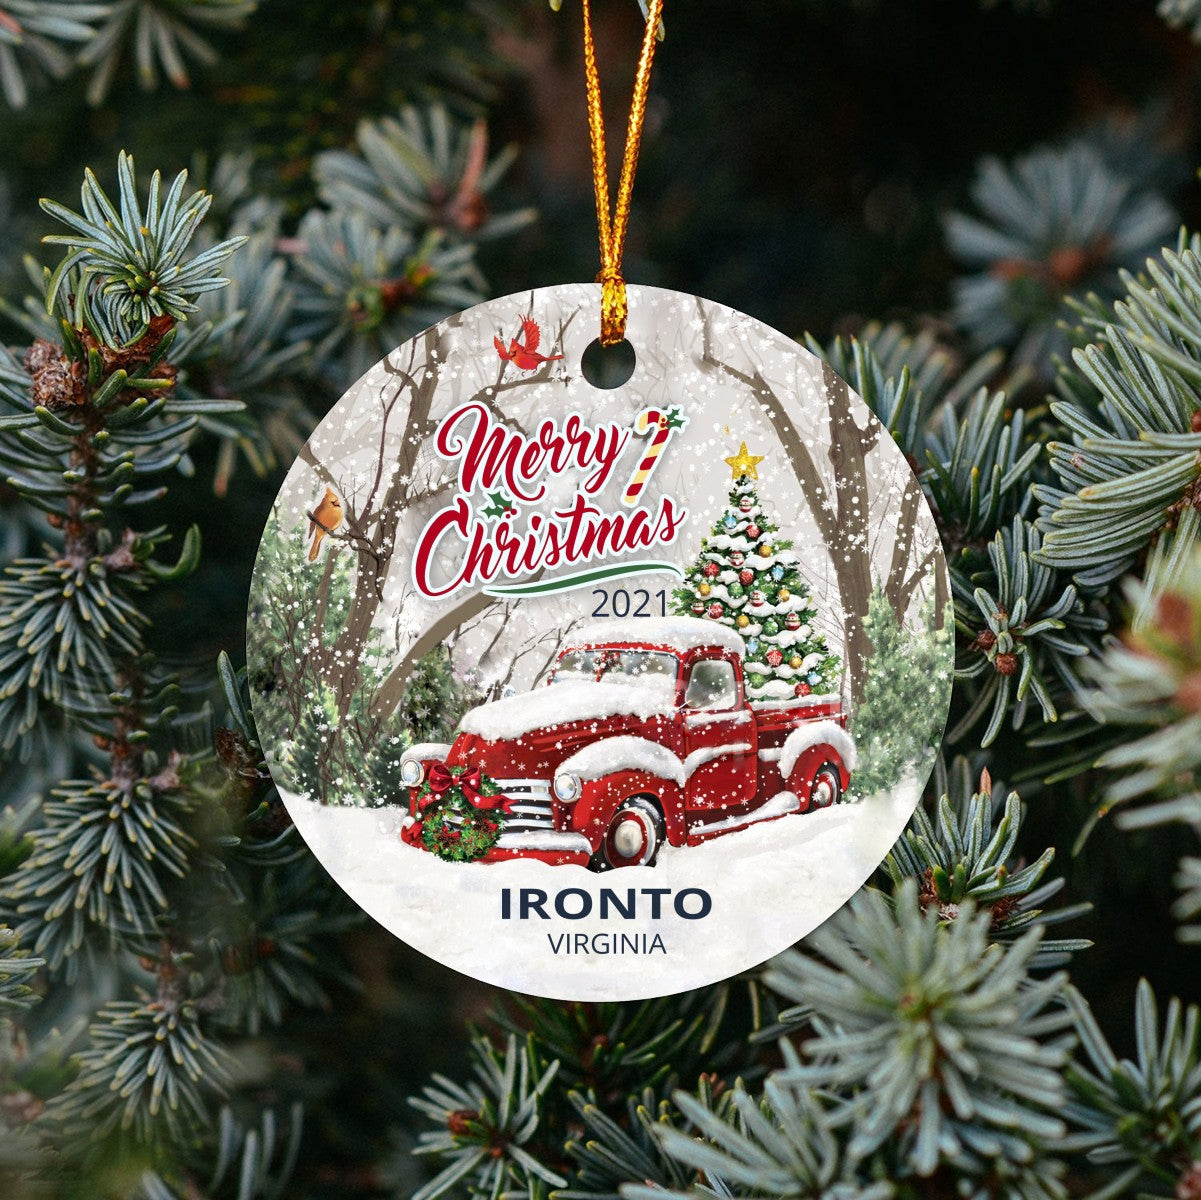 Christmas Tree Ornaments Ironto - Ornament With Name City, State Ironto Virginia VA Ornament - Red Truck Xmas Ornaments 3'' Plastic Gift For Family, Friend And Housewarming